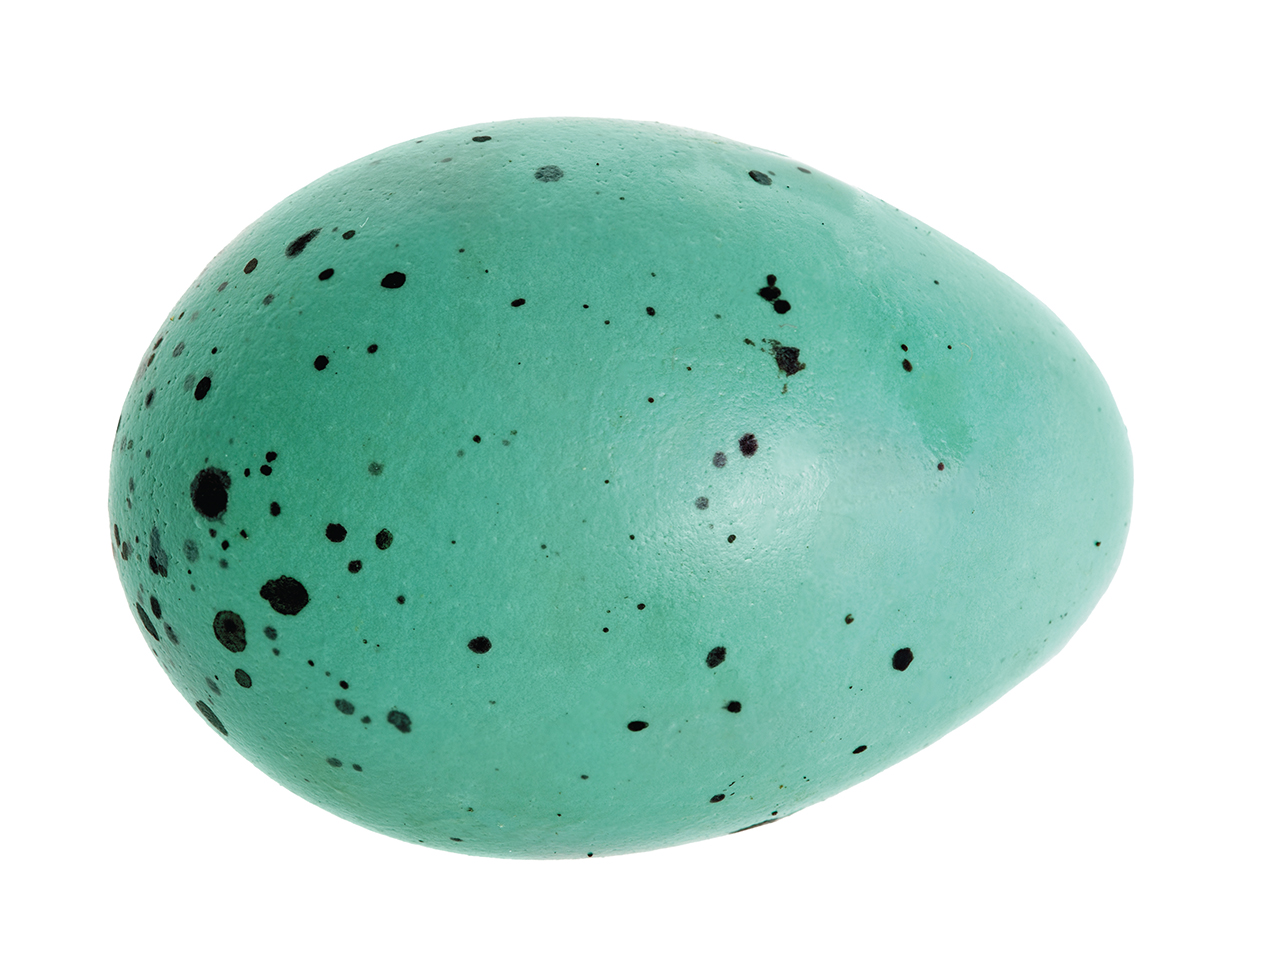 single blue spotted egg isolated on white background